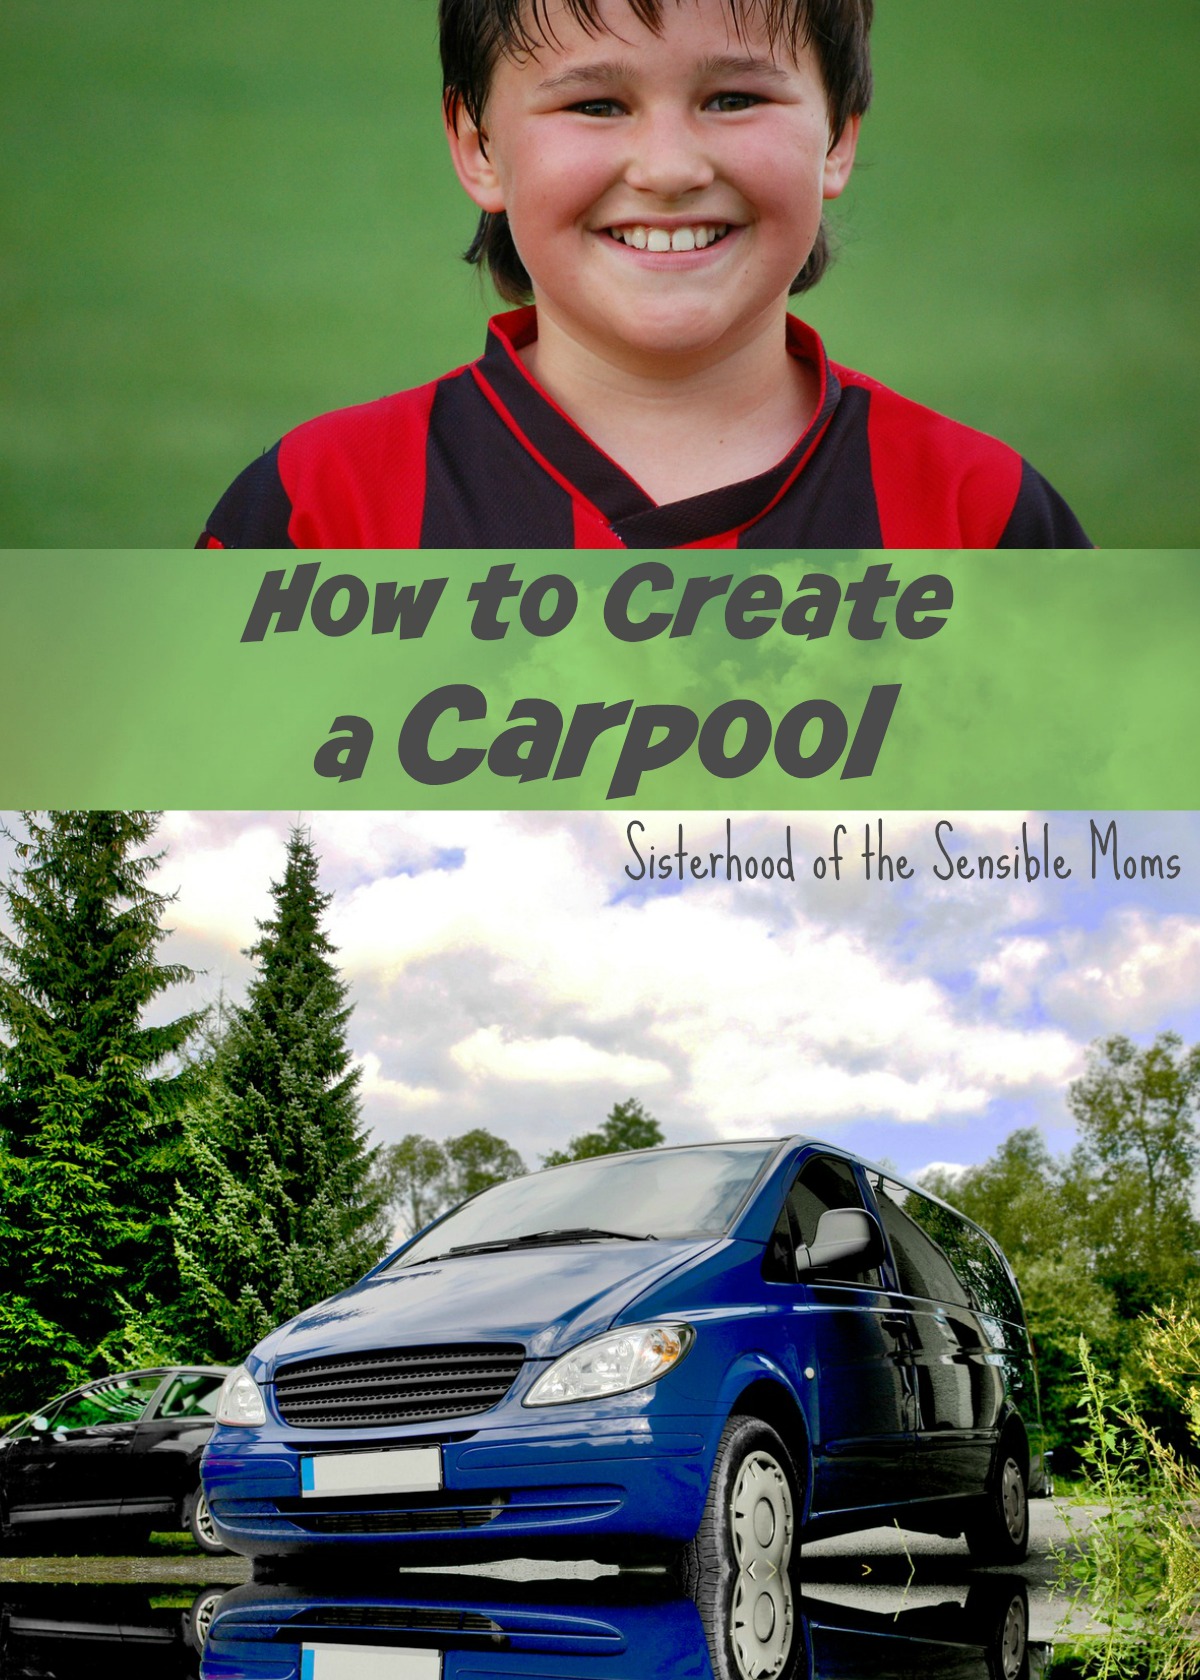 How to Create a Carpool | Got kids in sports? You need to create a carpool! Tips to put together your own sanity saver because friends don't let friends drive both ways to practice two days in a row! | Sisterhood of the Sensible Moms